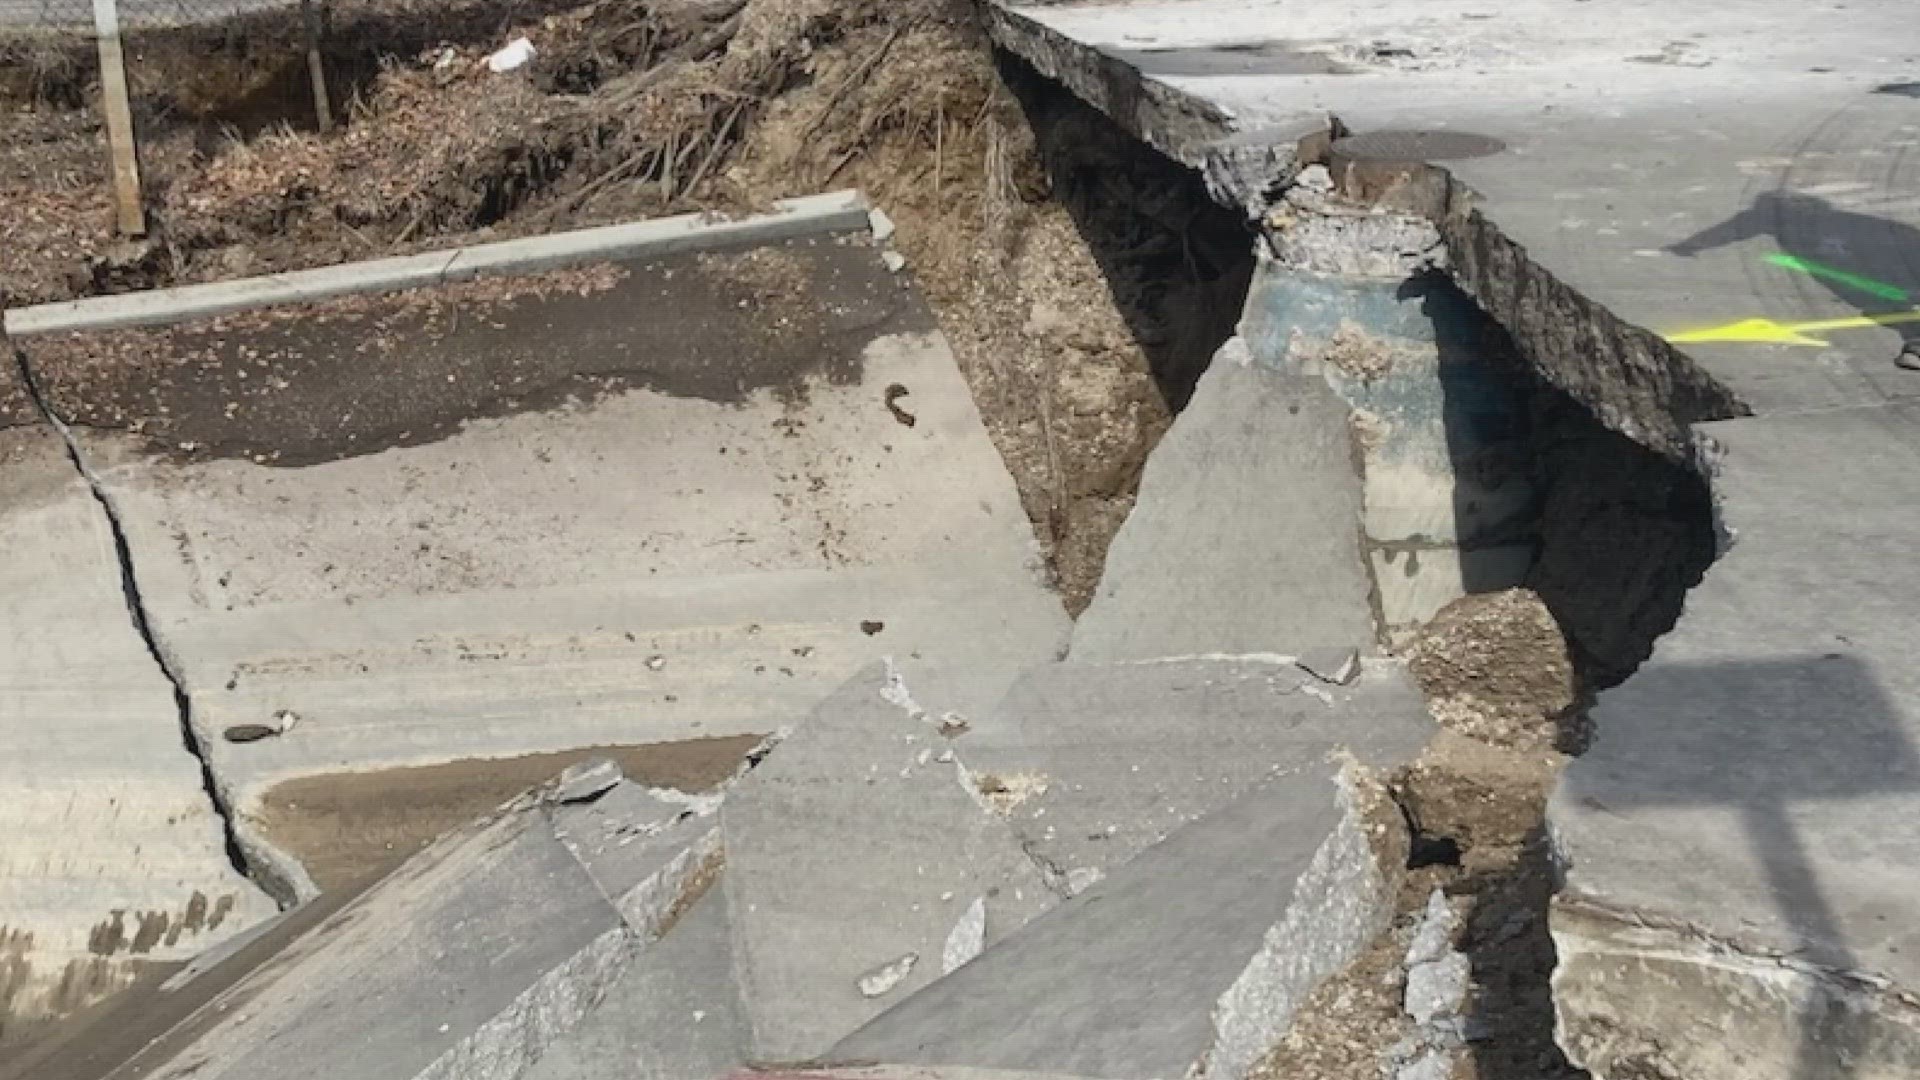 A large sinkhole collapsed an intersection in south St. Louis, just off Interstate 55. The sinkhole opened at the intersection of Blow Street and Idaho Avenue.